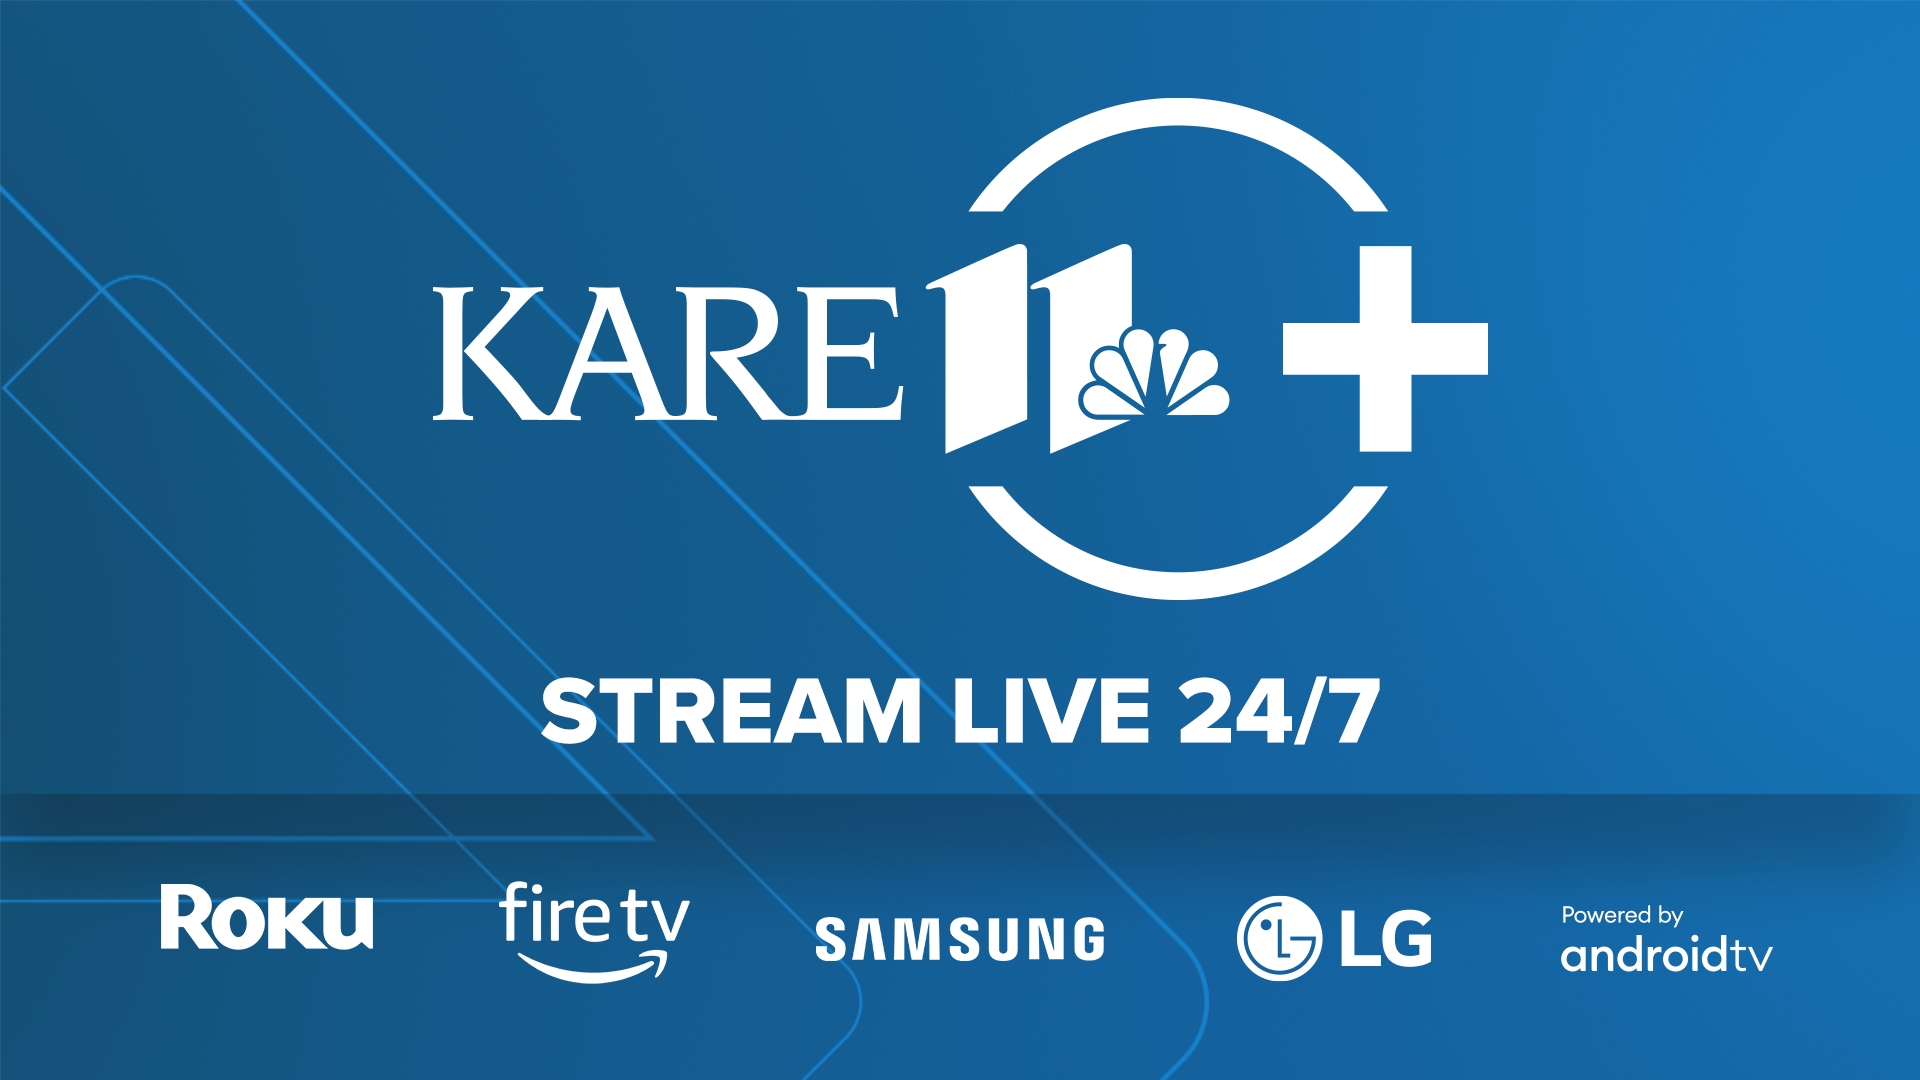 Download KARE 11+ to stream live news 24/7